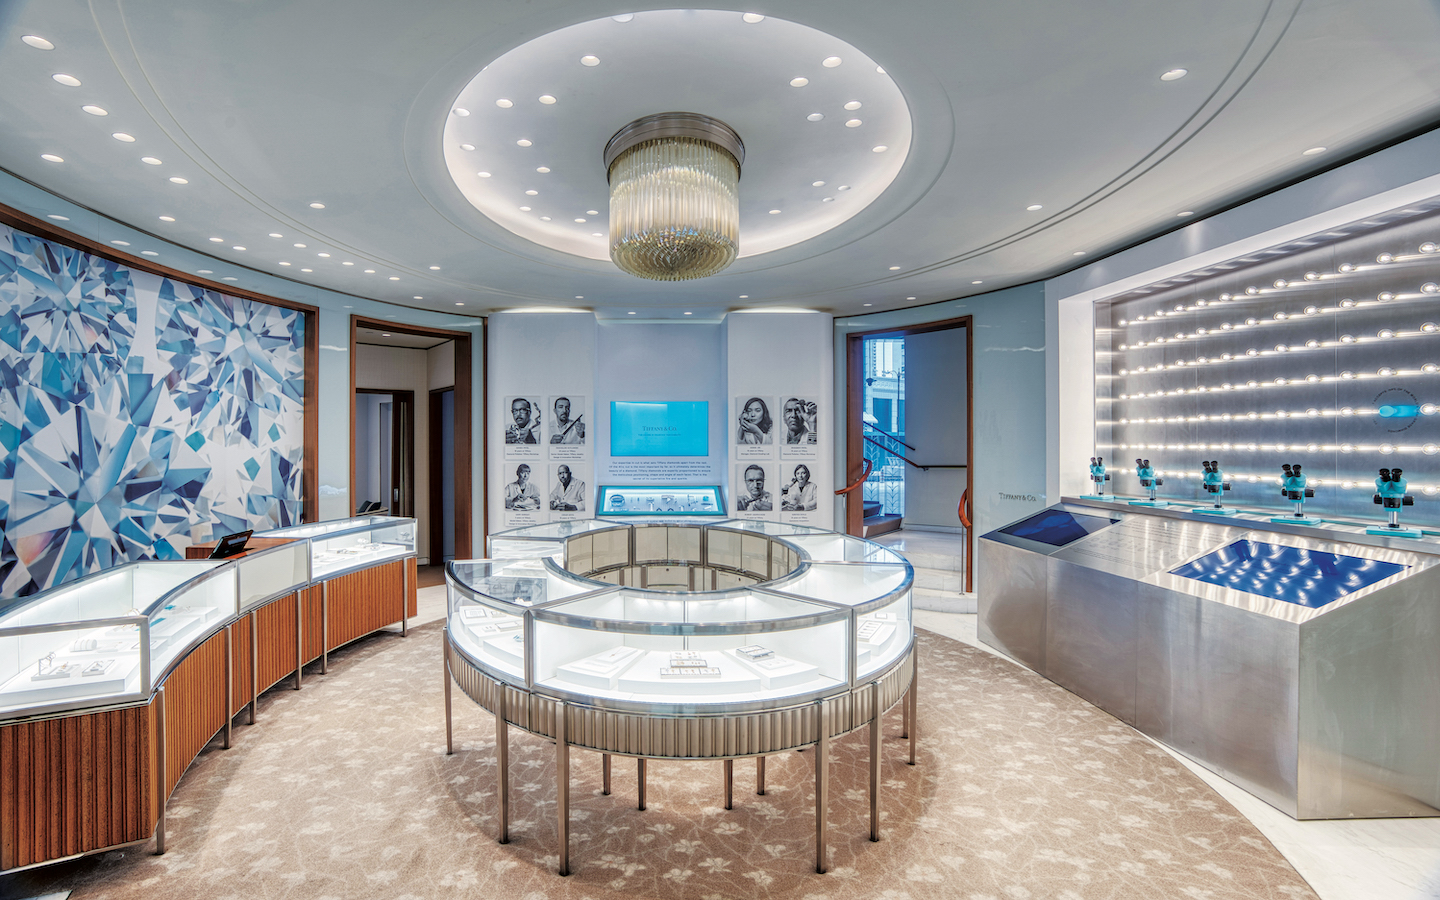 Tiffany & Co's special showcase in KLCC takes you through the maison's  180-year-old heritage